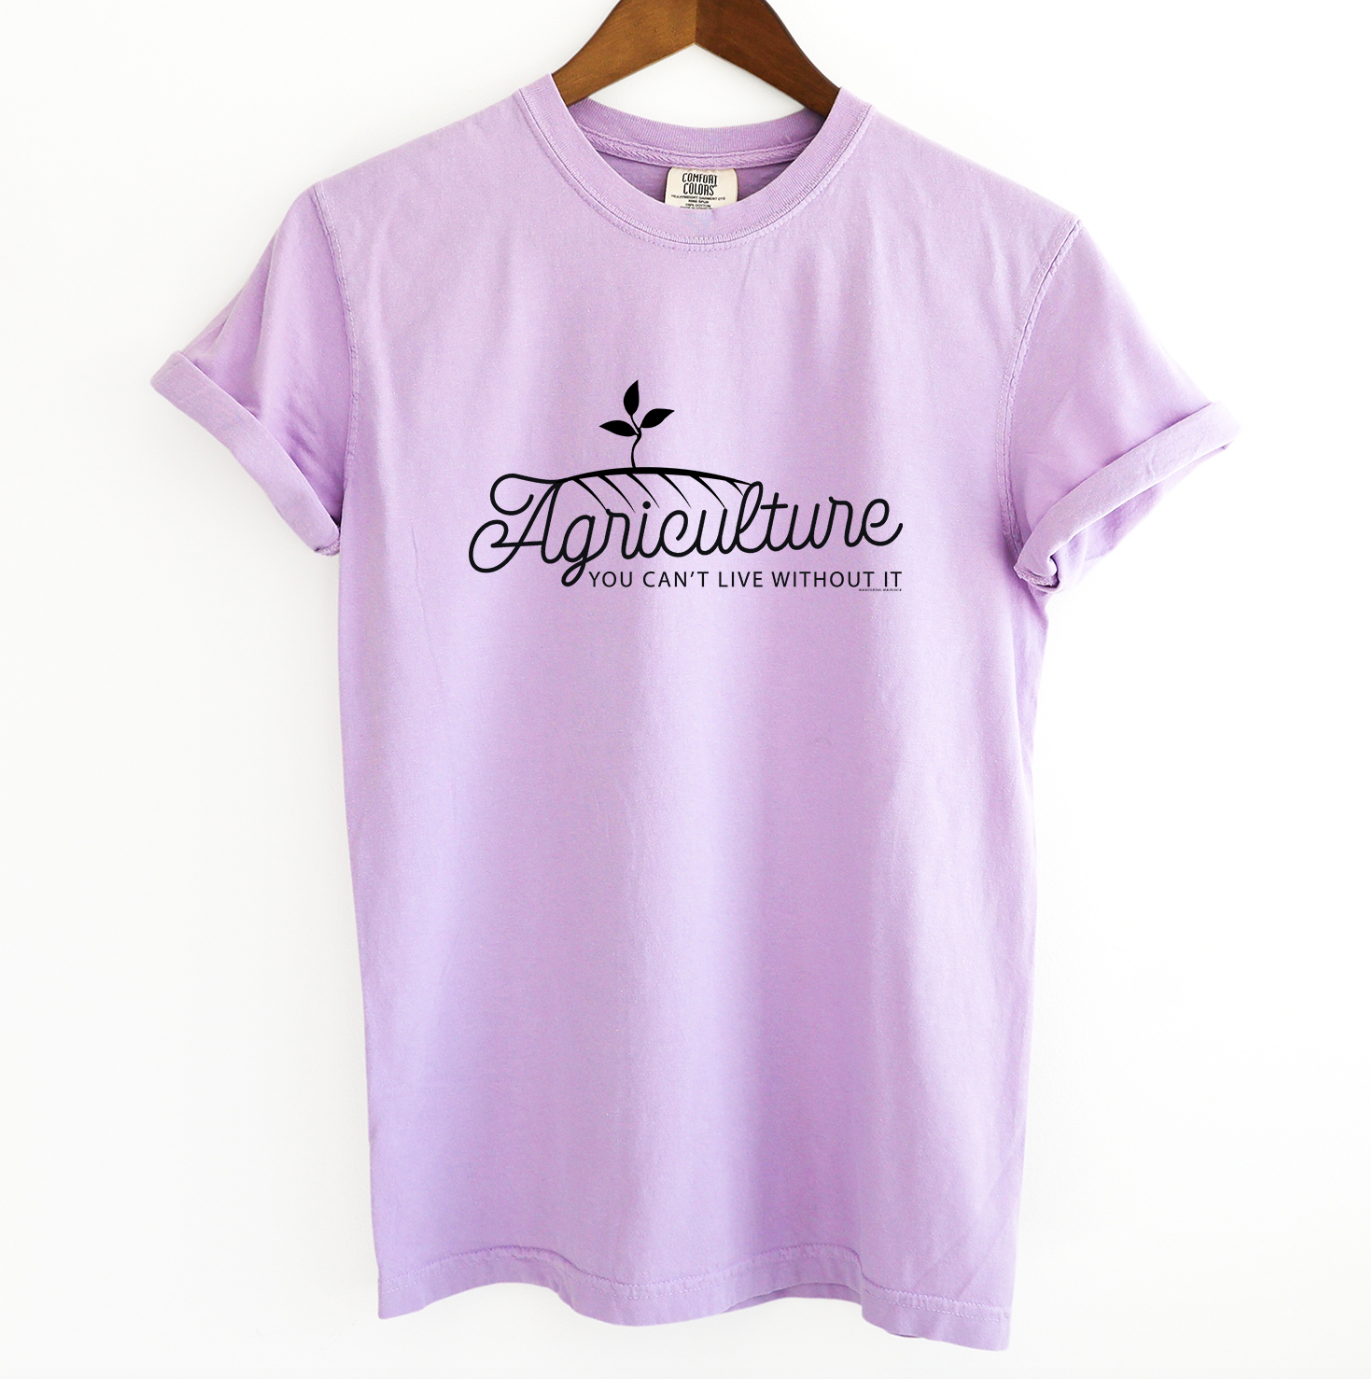 Agriculture You Can't Live Without It ComfortWash/ComfortColor T-Shirt (S-4XL) - Multiple Colors!